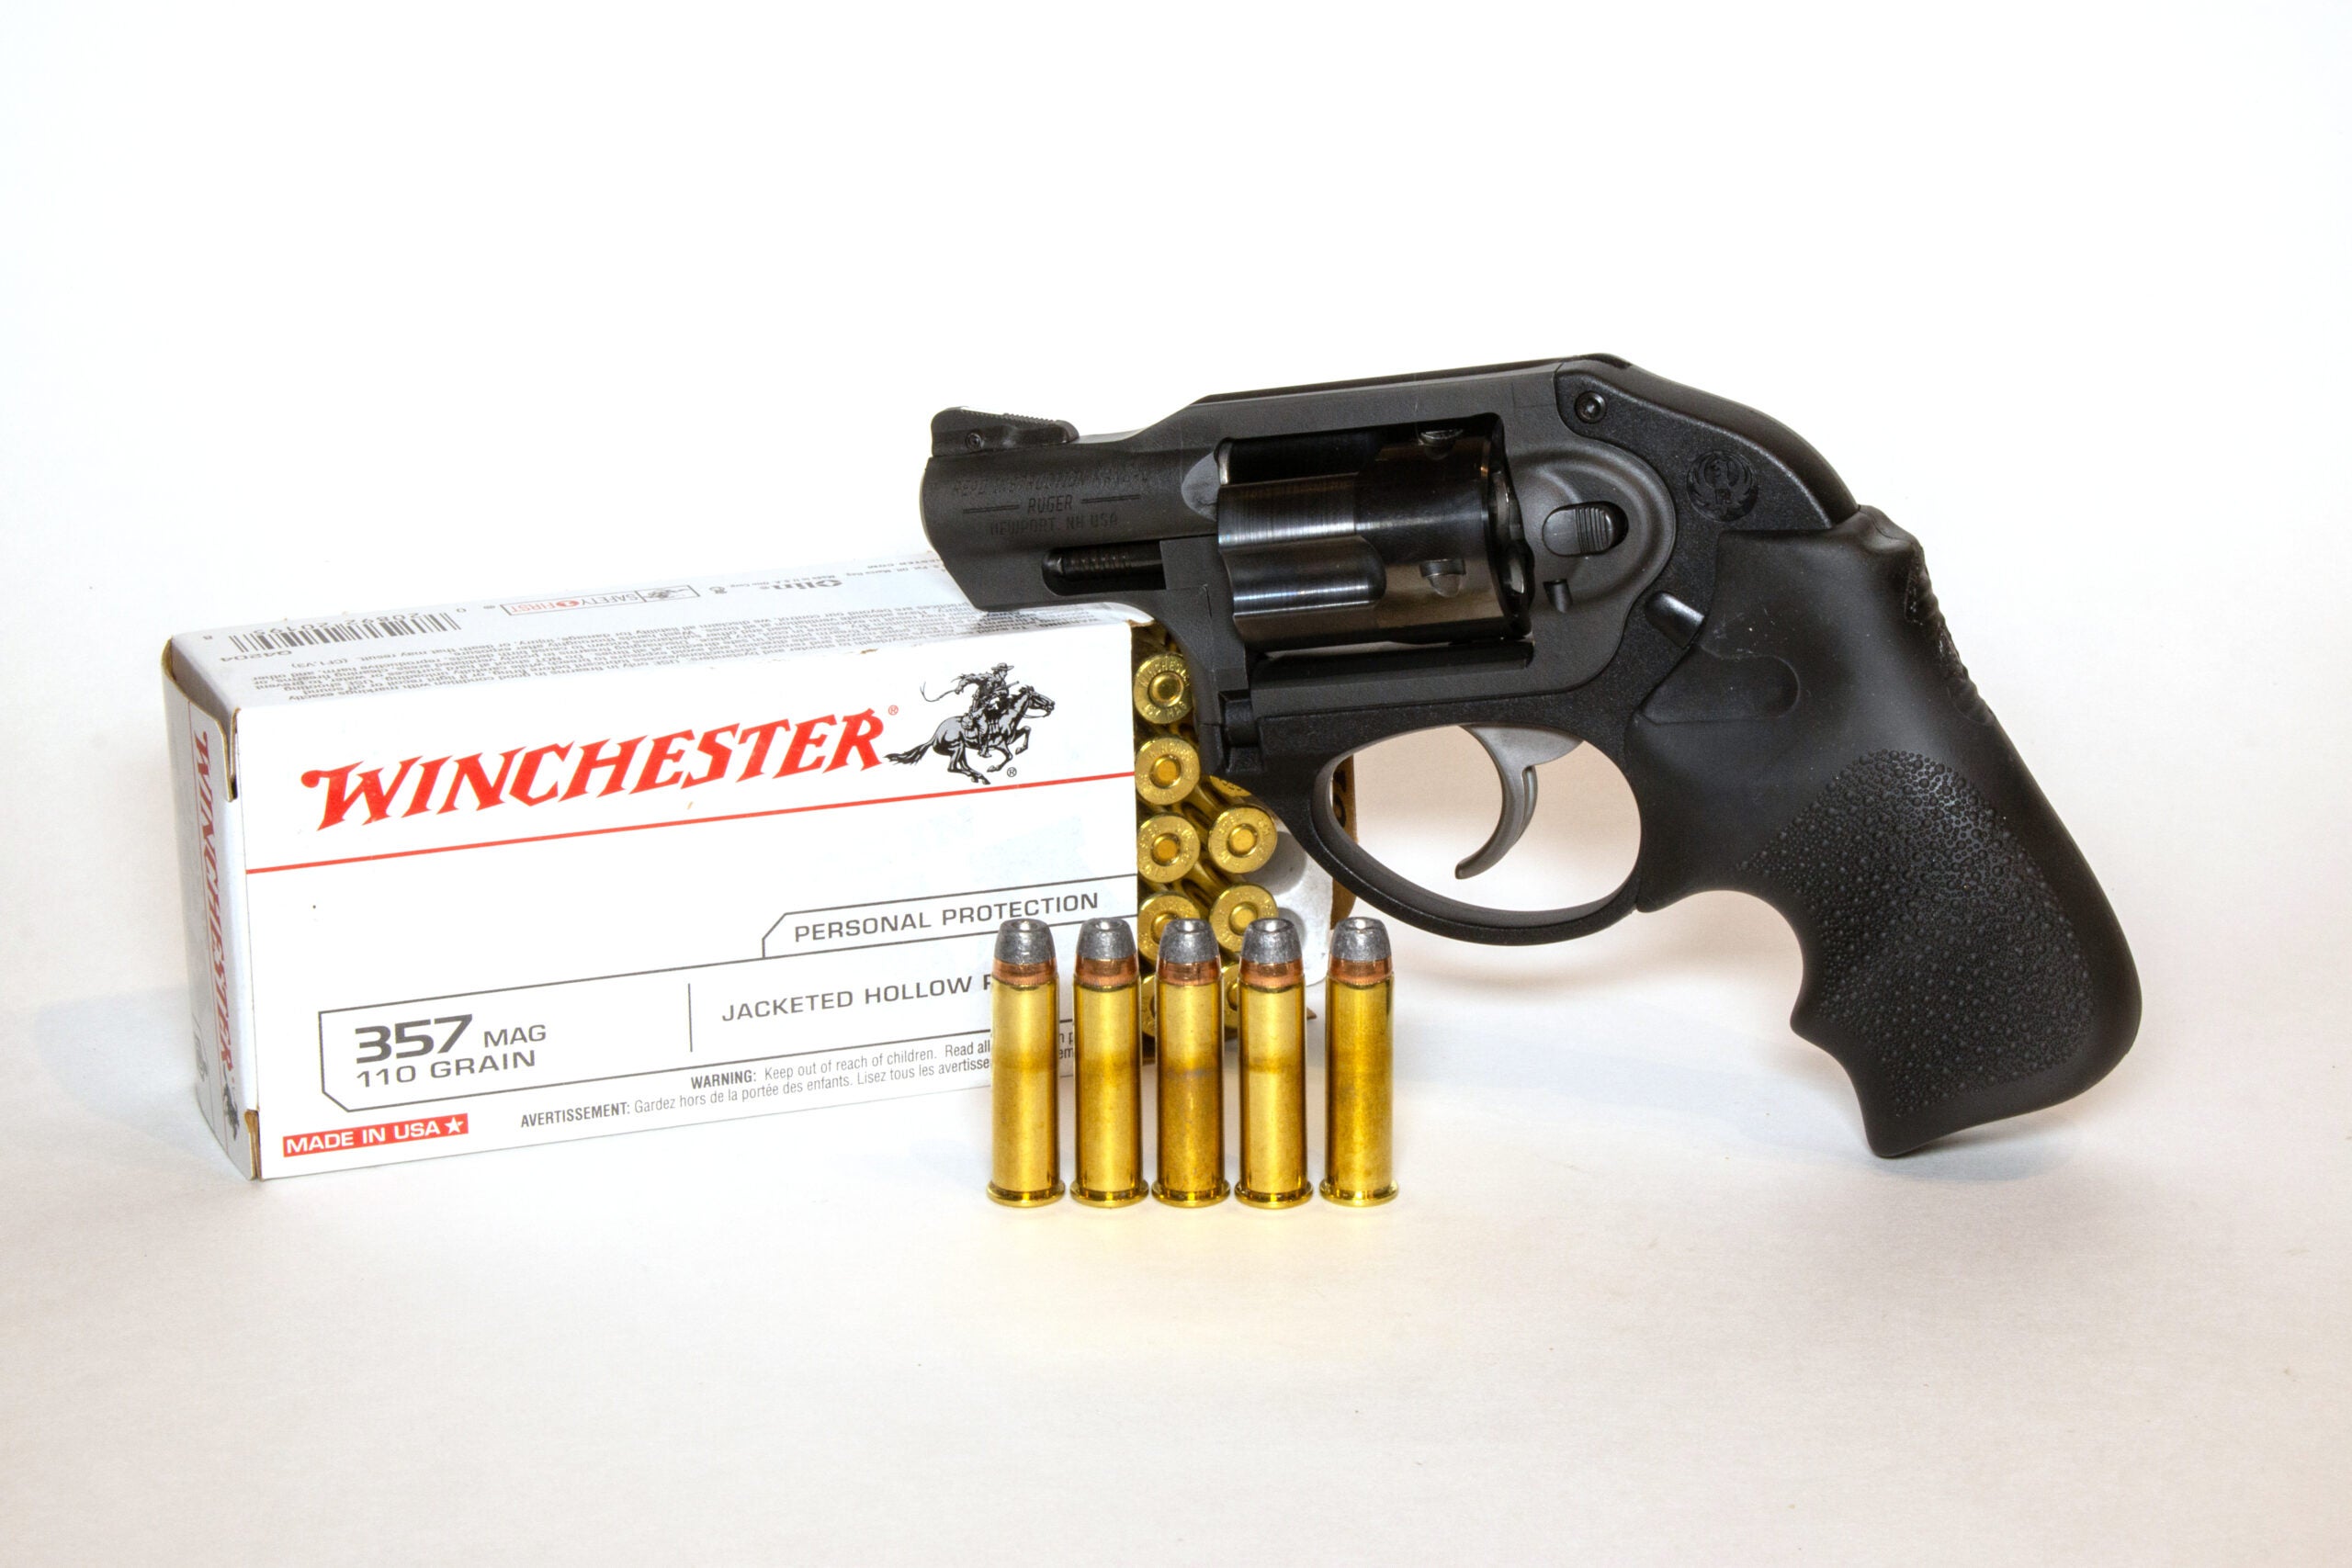 A box of 357 Magnum ammo and a snub-nose revolver on white background